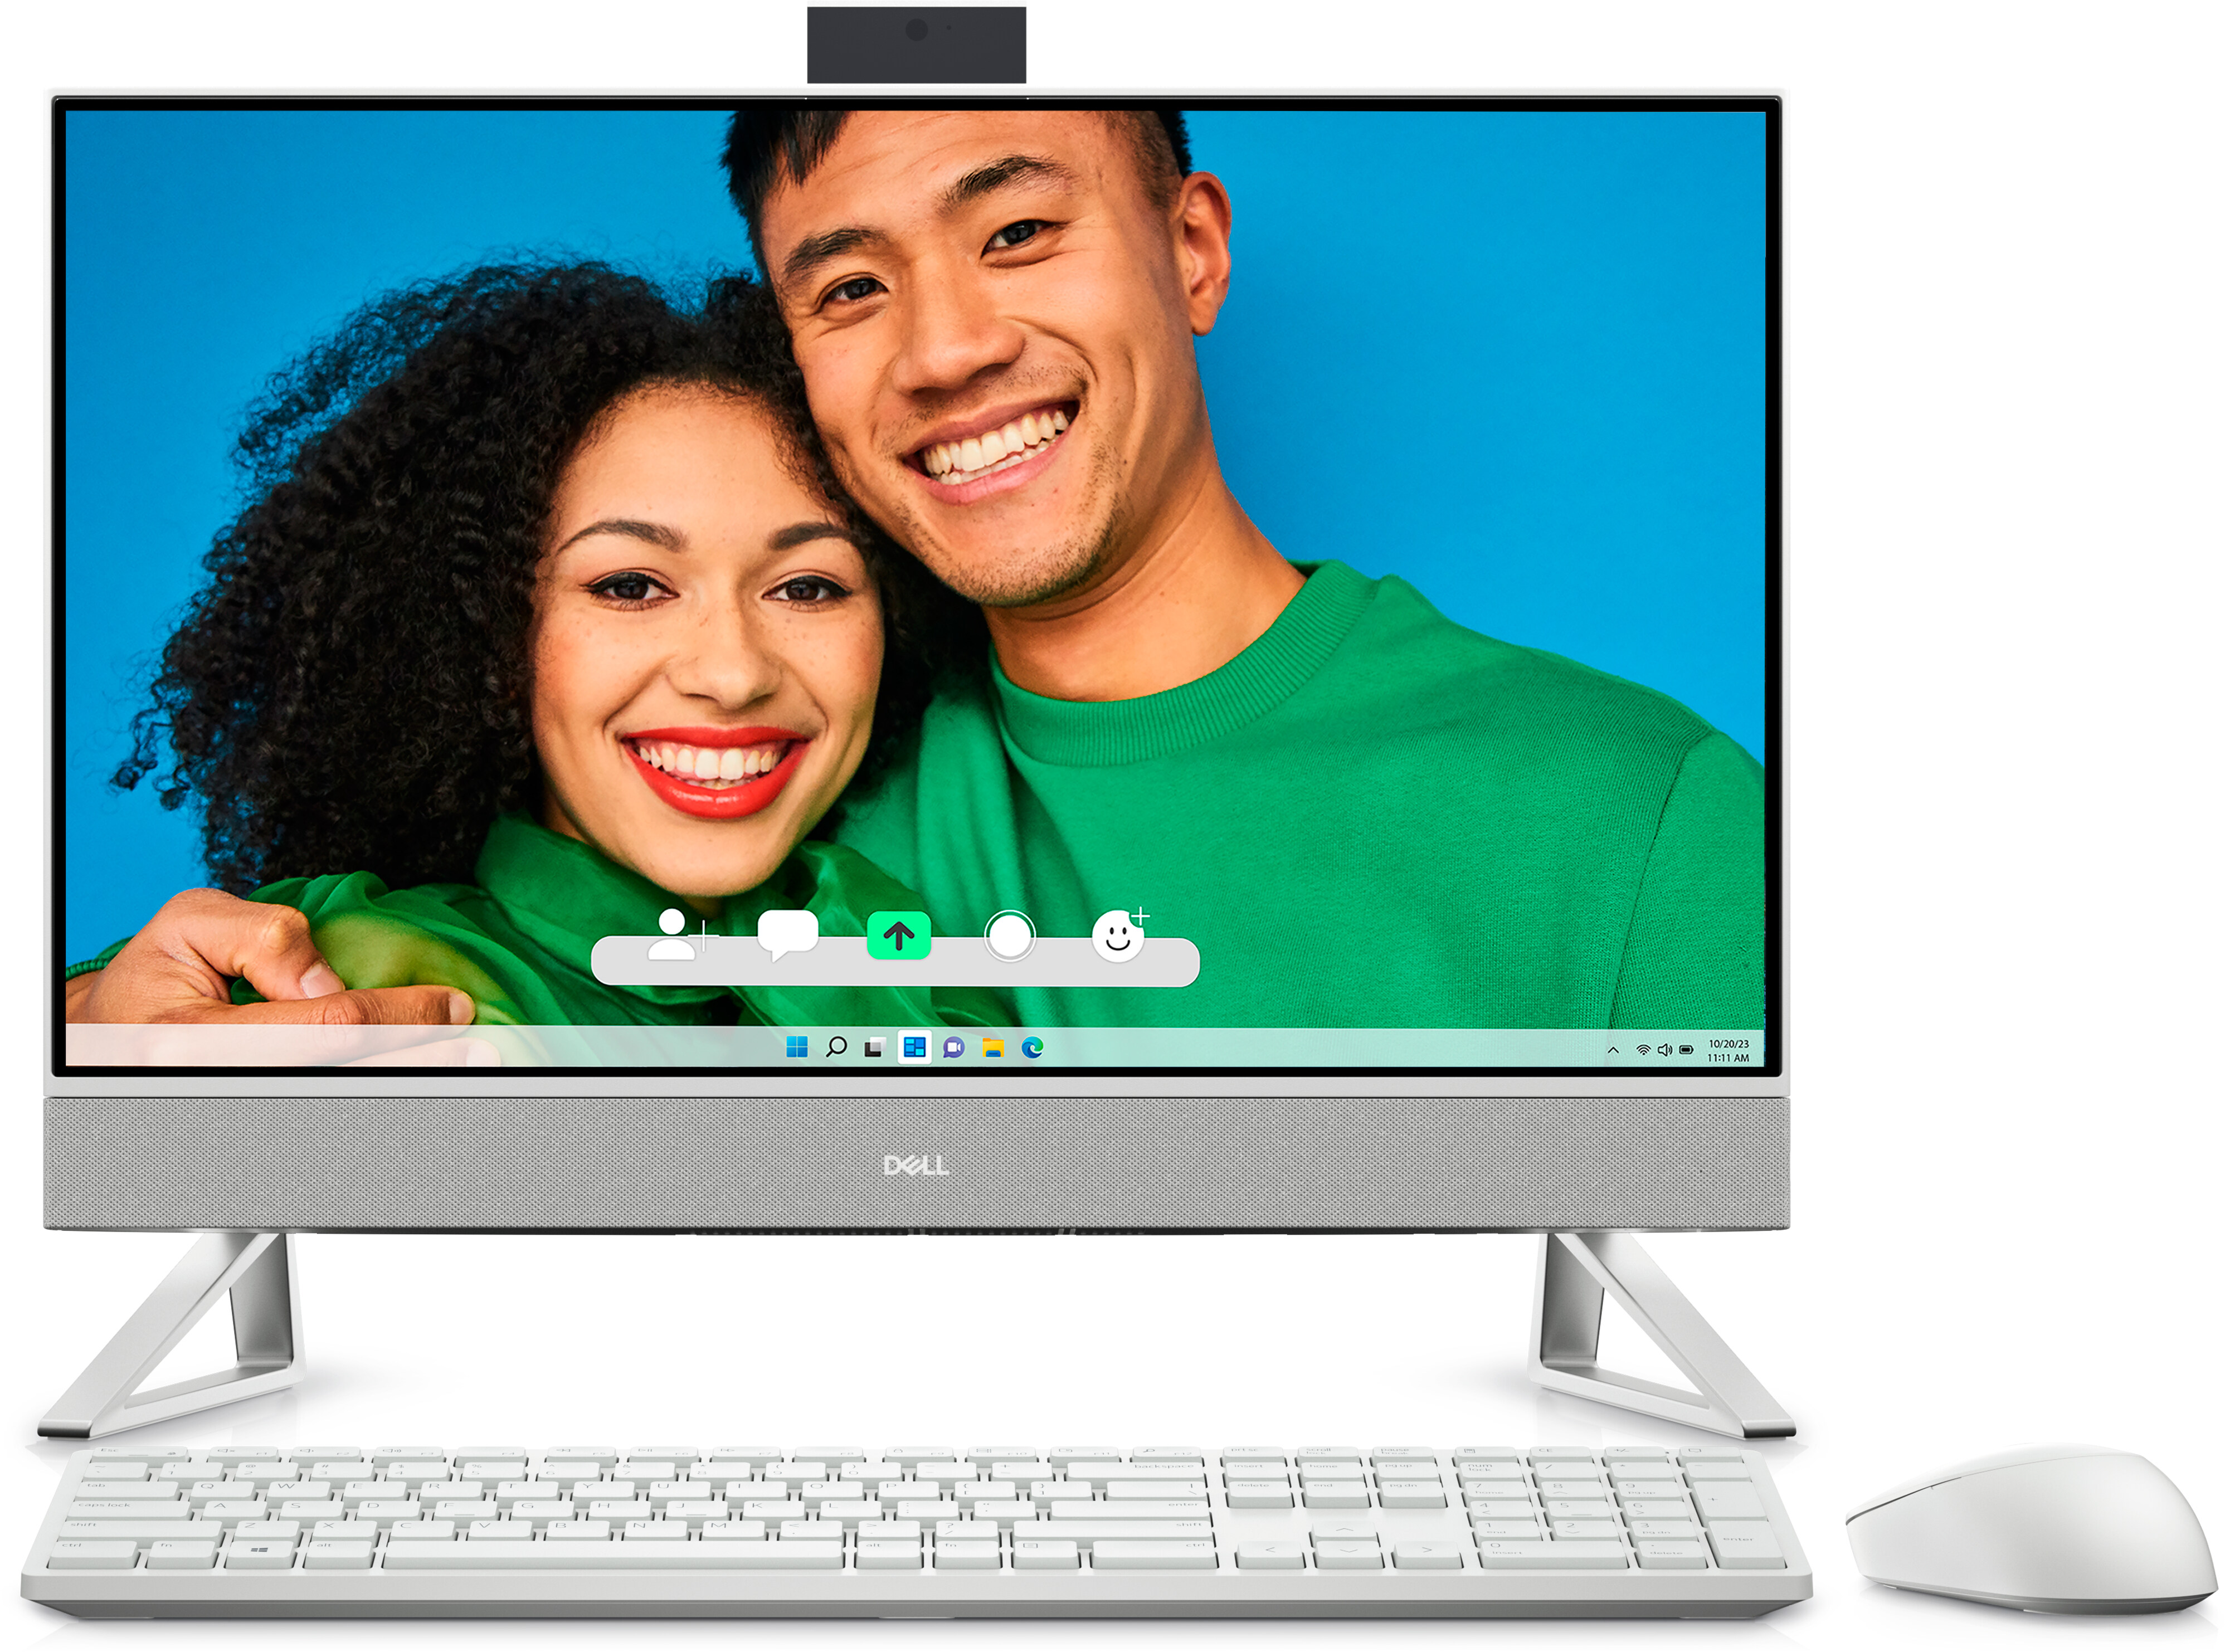 https://i.dell.com/is/image/DellContent/content/dam/ss2/product-images/dell-client-products/desktops/inspiron-desktops/27-7720/media-gallery/gray/aio-desktop-inspiron-27-7720-gray-gallery-4-fb.psd?fmt=pjpg&pscan=auto&scl=1&wid=3993&hei=2965&qlt=100,1&resMode=sharp2&size=3993,2965&chrss=full&imwidth=5000